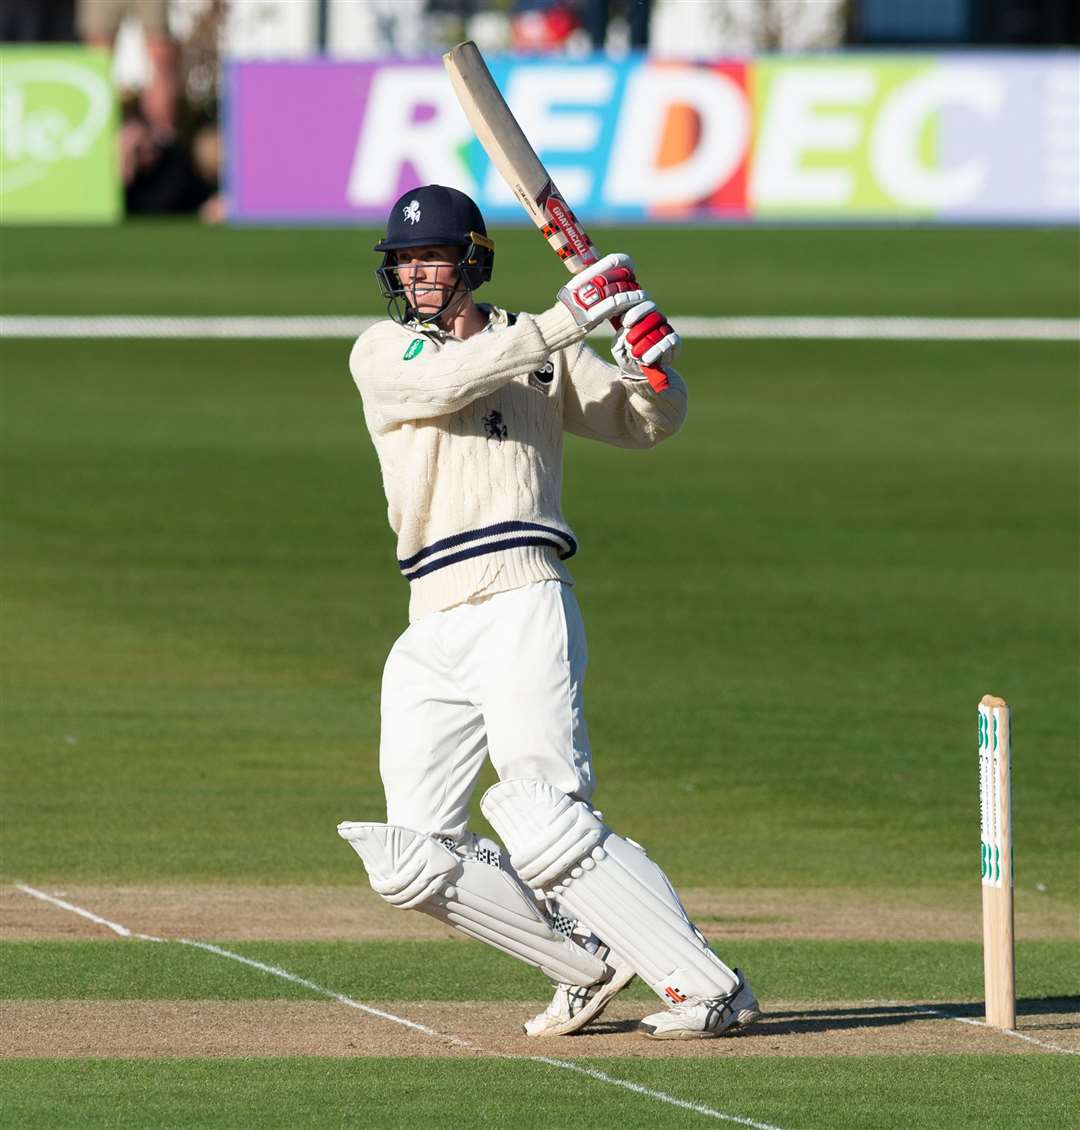 Kent's Zak Crawley collects another boundary to bring up his half century against Yorkshire